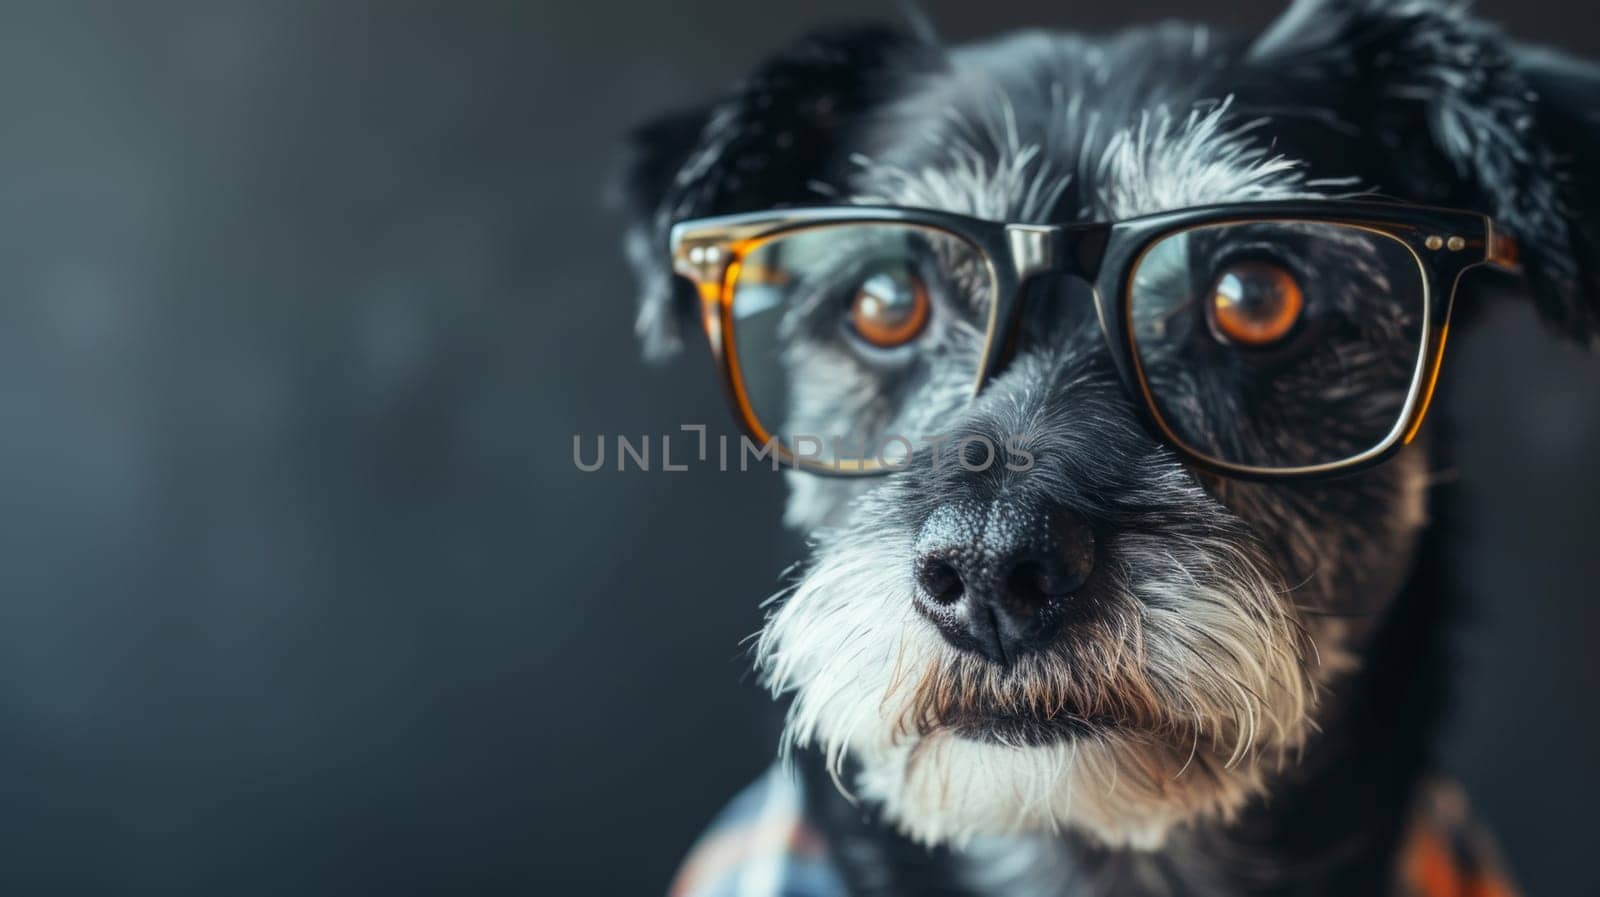 A close up of a dog wearing glasses and looking at the camera